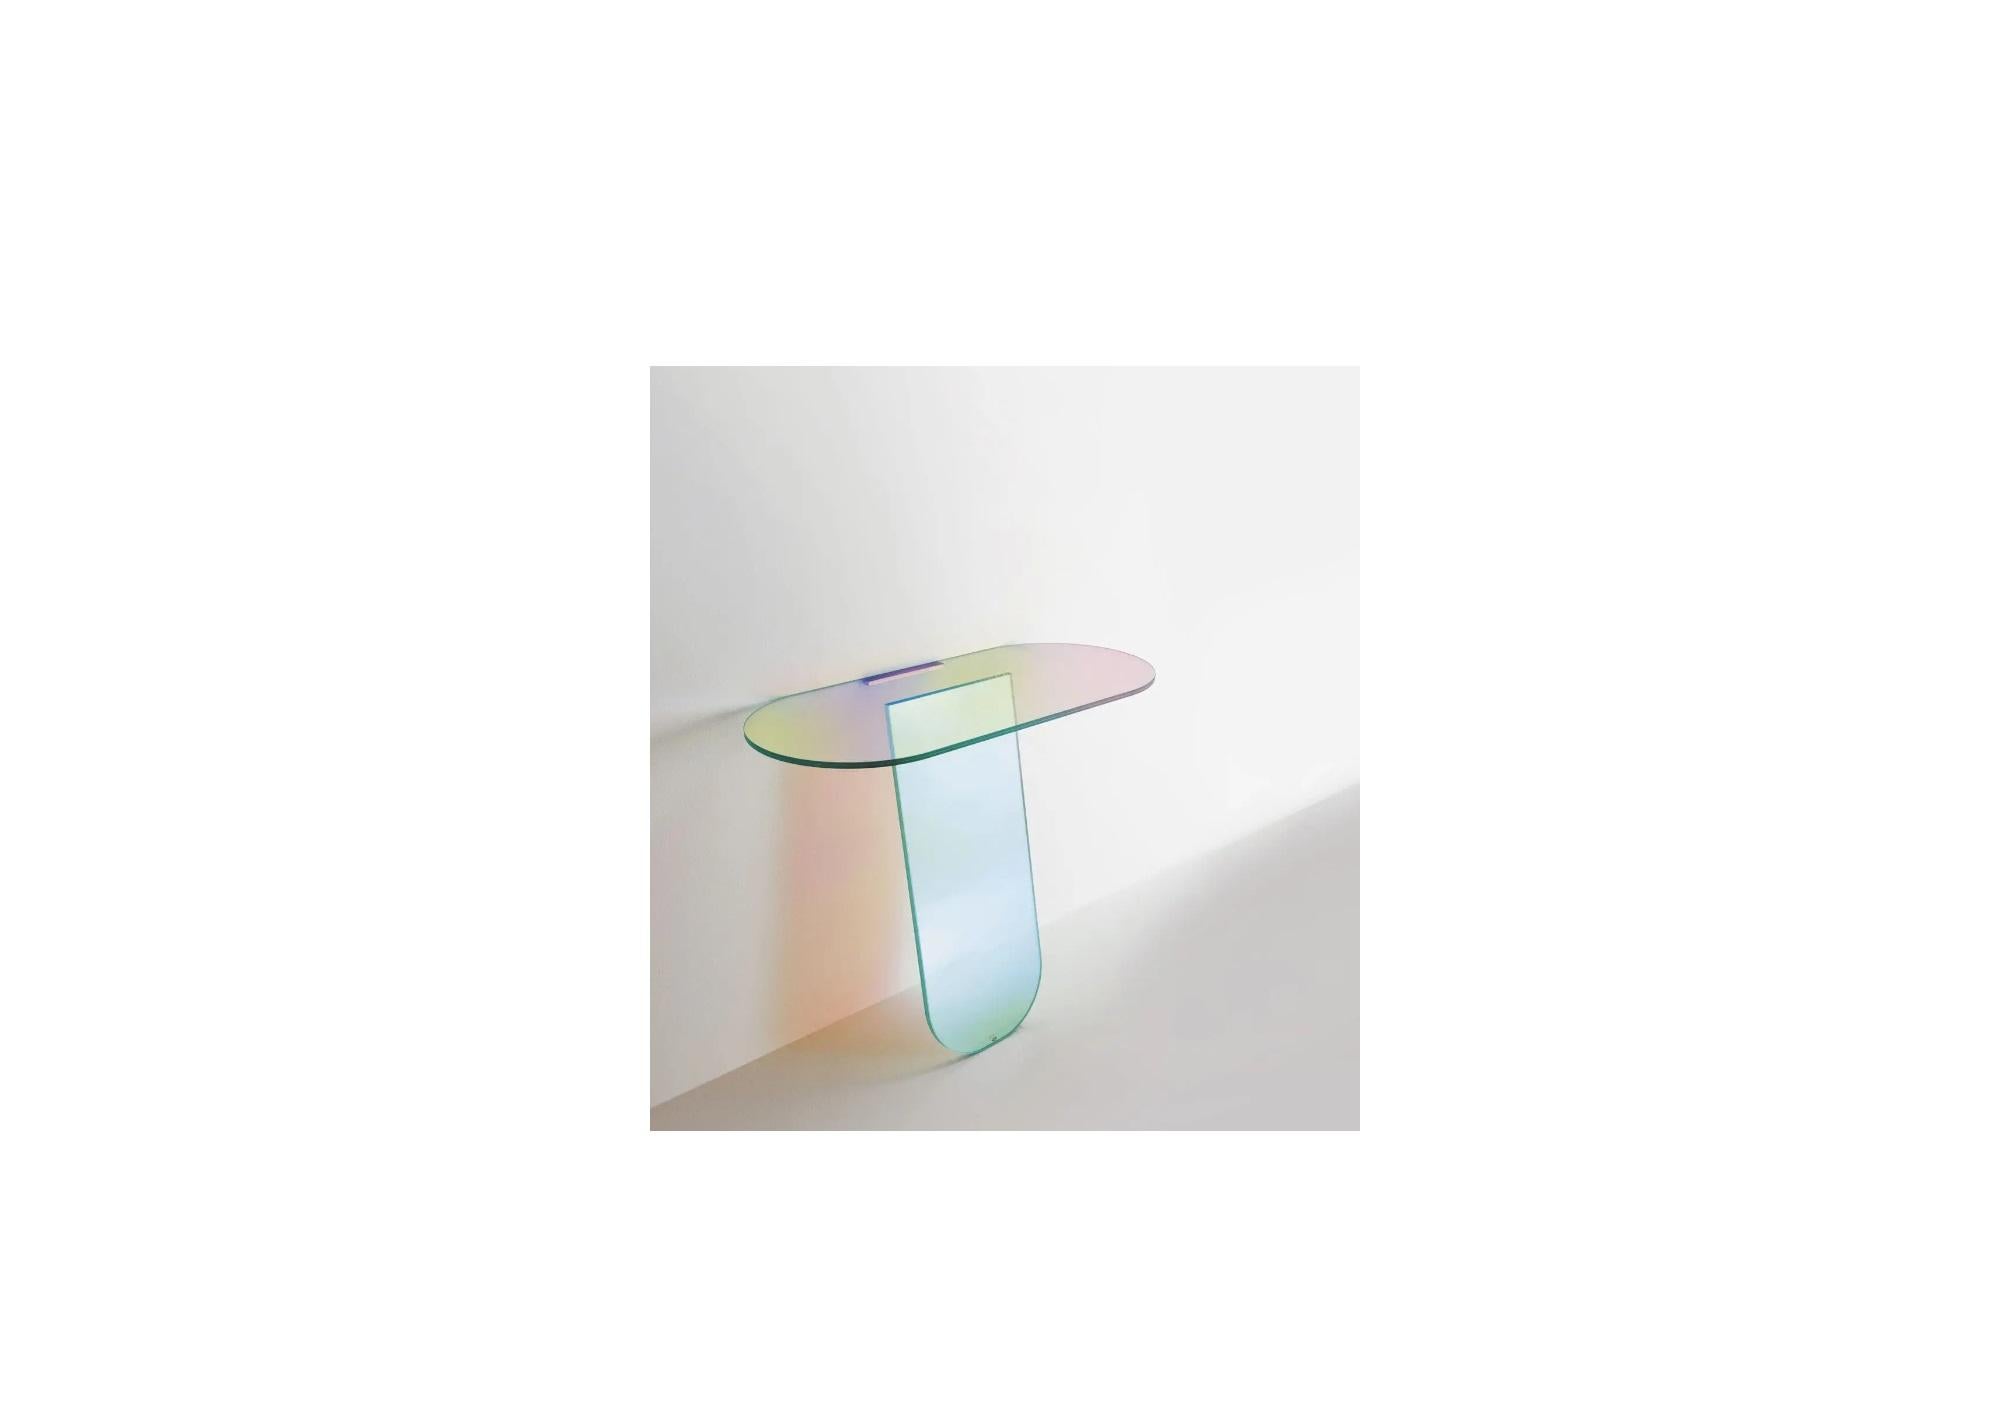 In laminated and glued glass, characterized by a special iridescent multichromatic finish; the nuance varies according to the angle of the light source and the vantage point. Reflected objects with a magical and ethereal appearance